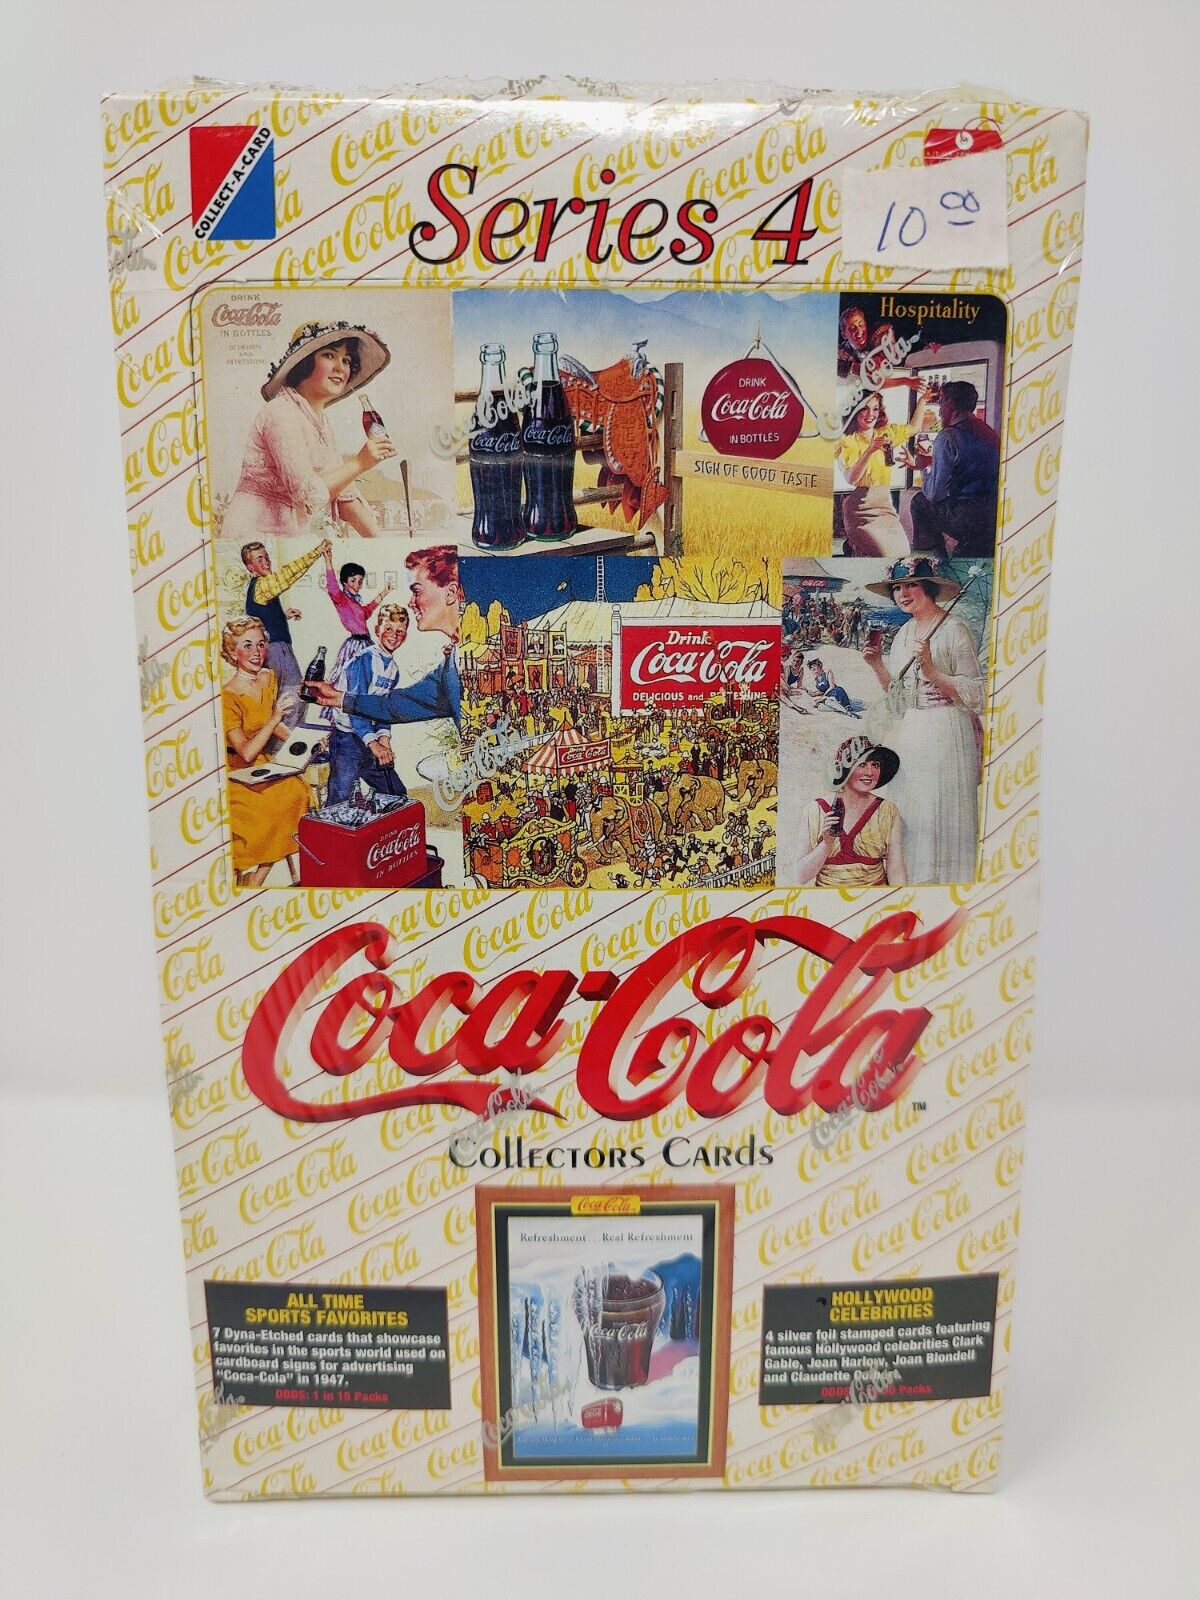 1995 COCA COLA SERIES 4 FACTORY SEALED 36-PACK BOX TRADING CARDS COLLECT-A-CARD